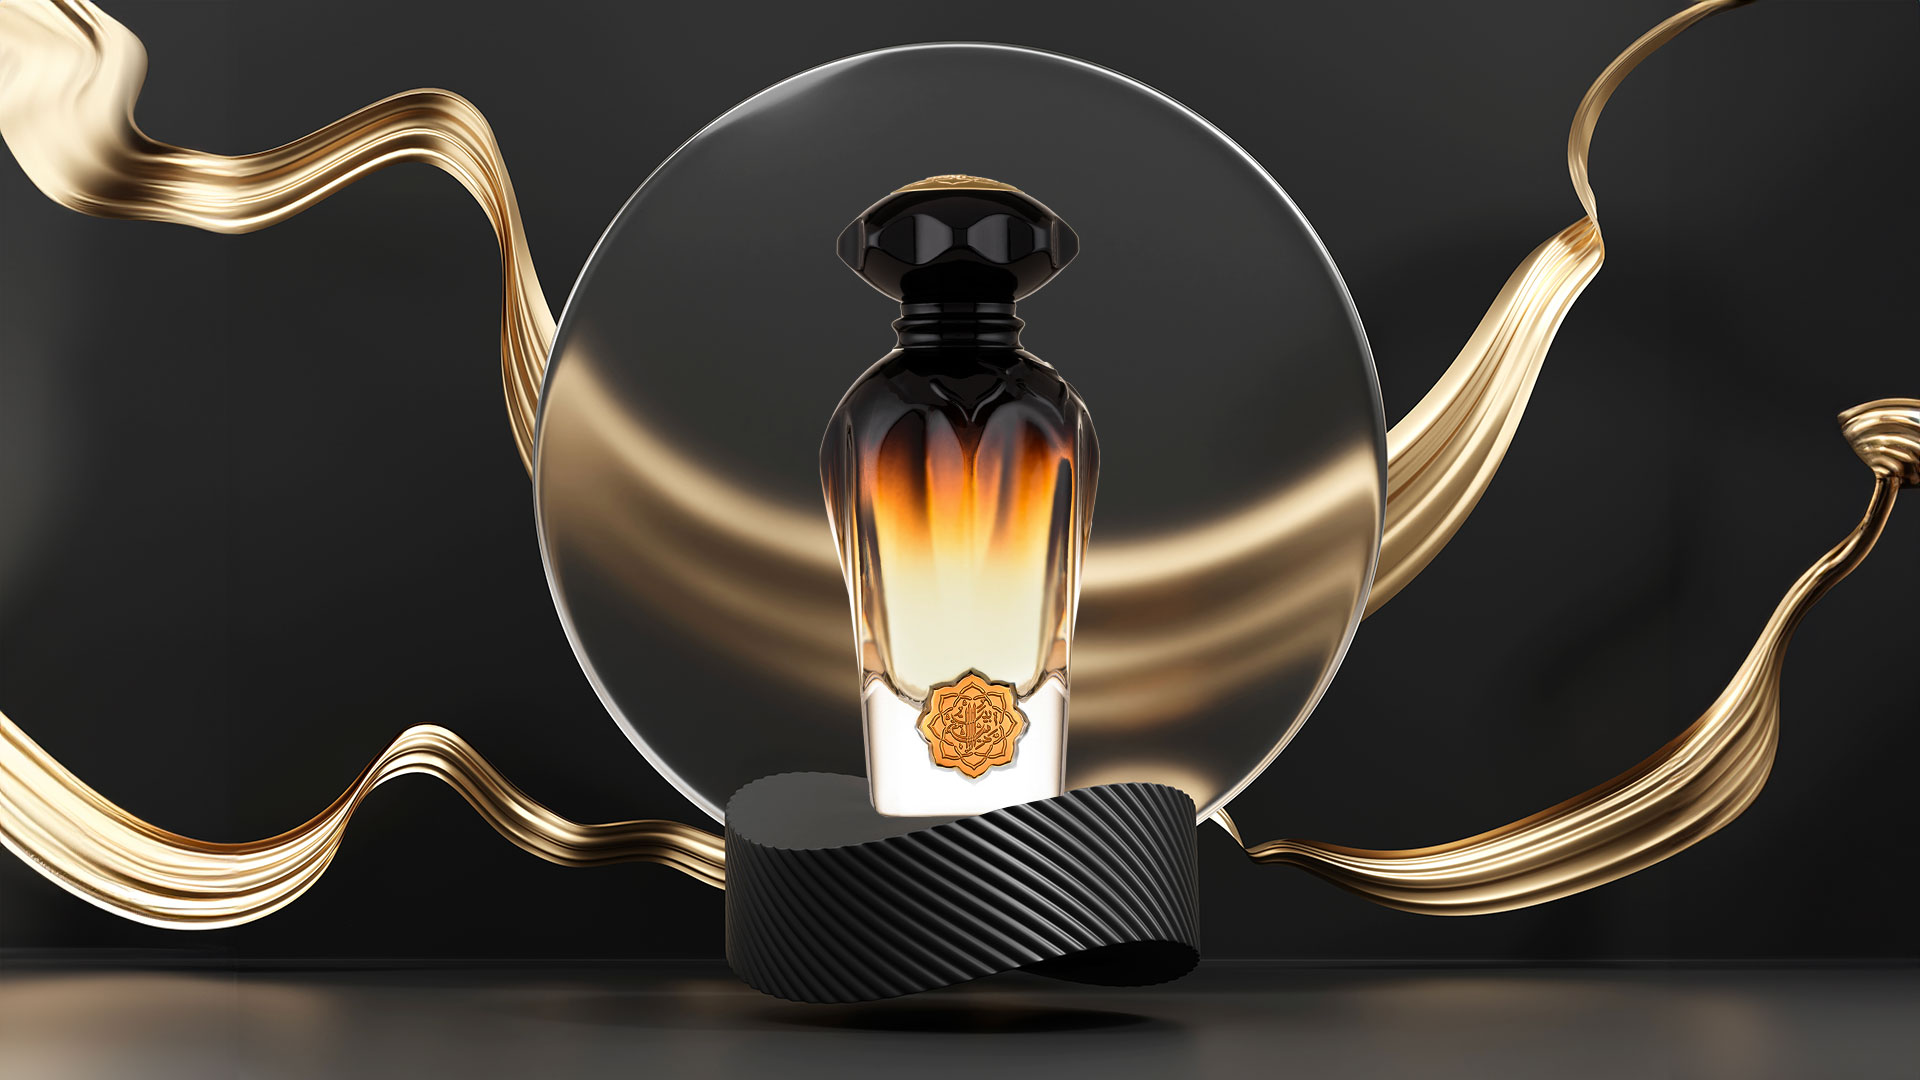 Affordable Luxury: Best-Selling Branded Perfumes at Unbeatable Prices ​